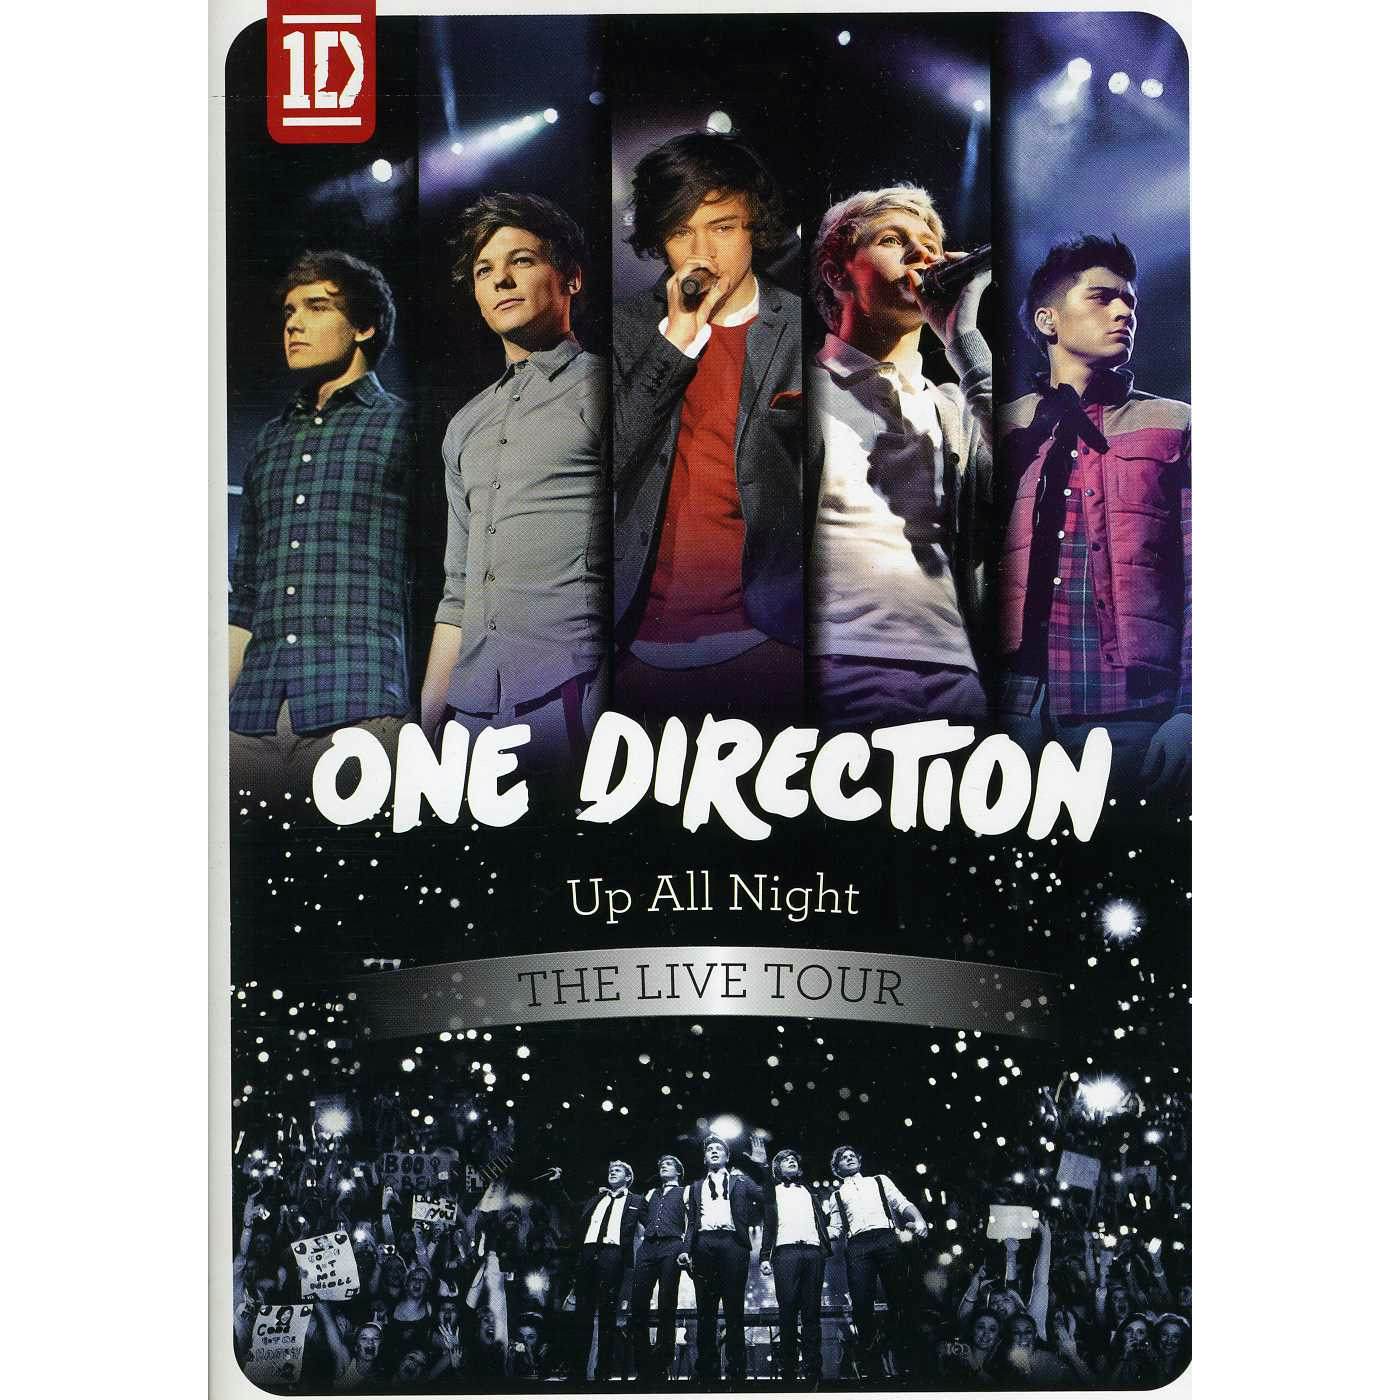 One Direction UP ALL NIGHT: LIVE TOUR DVD